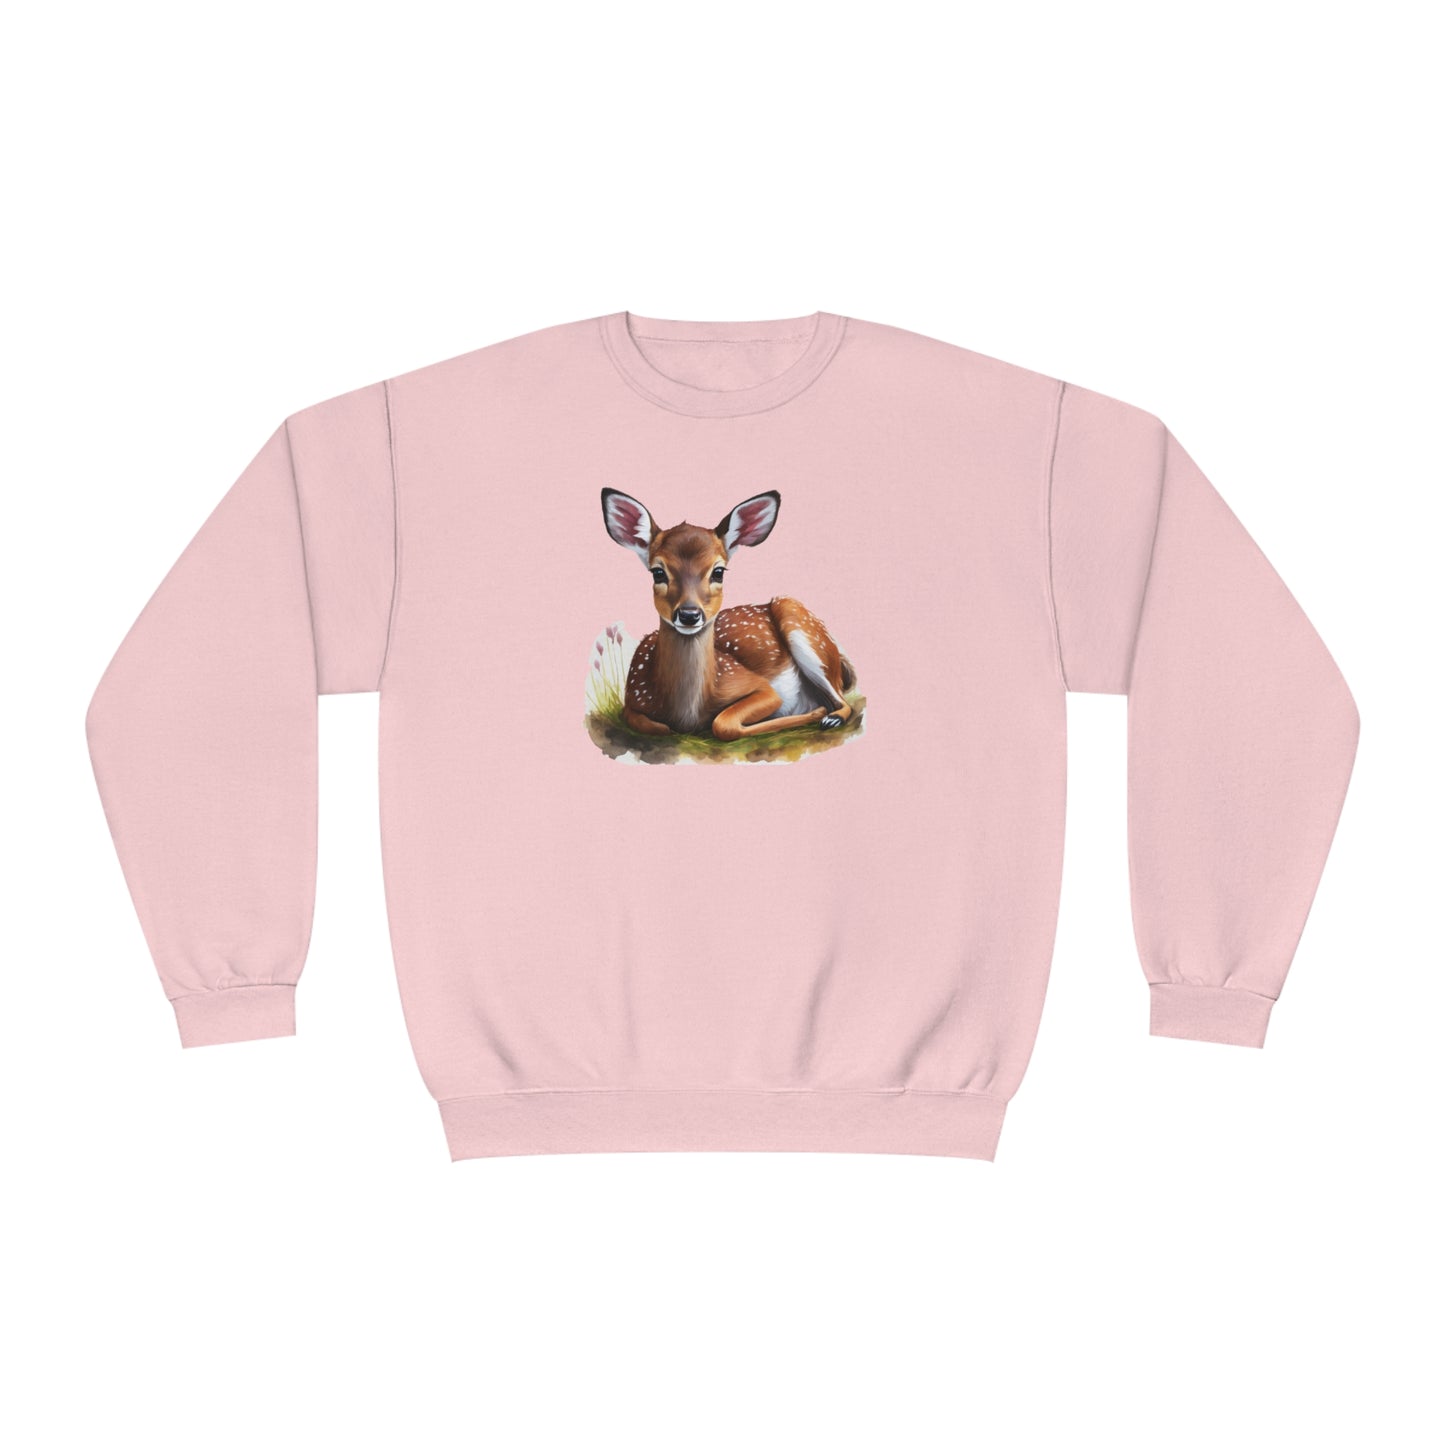 dear hearted serenity - tranquil deer in the woods on a pink sweatshirt 